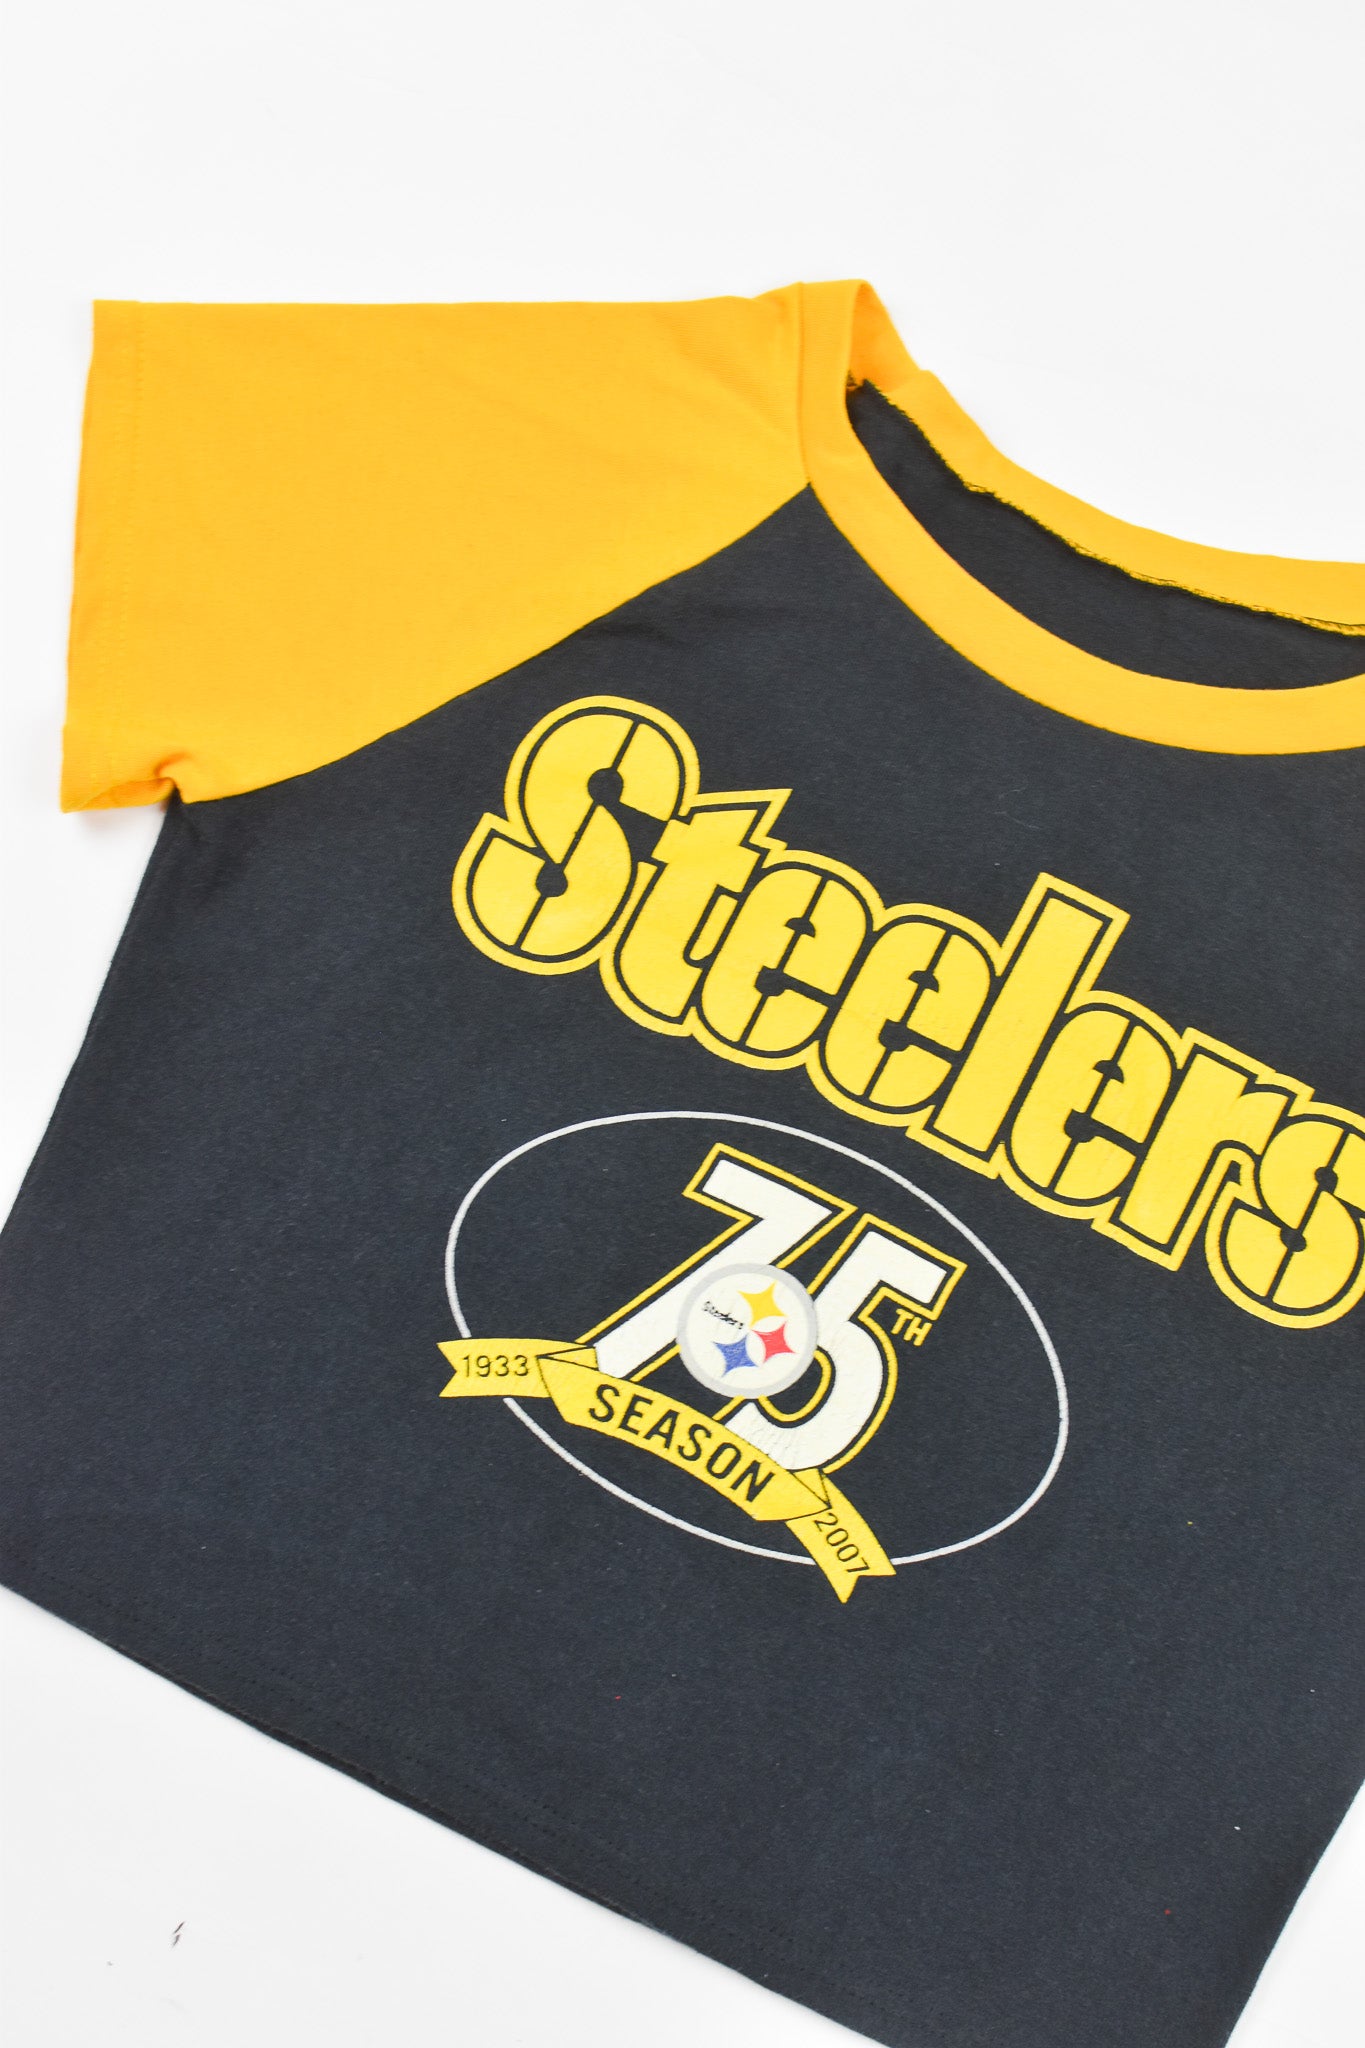 steelers baby clothes